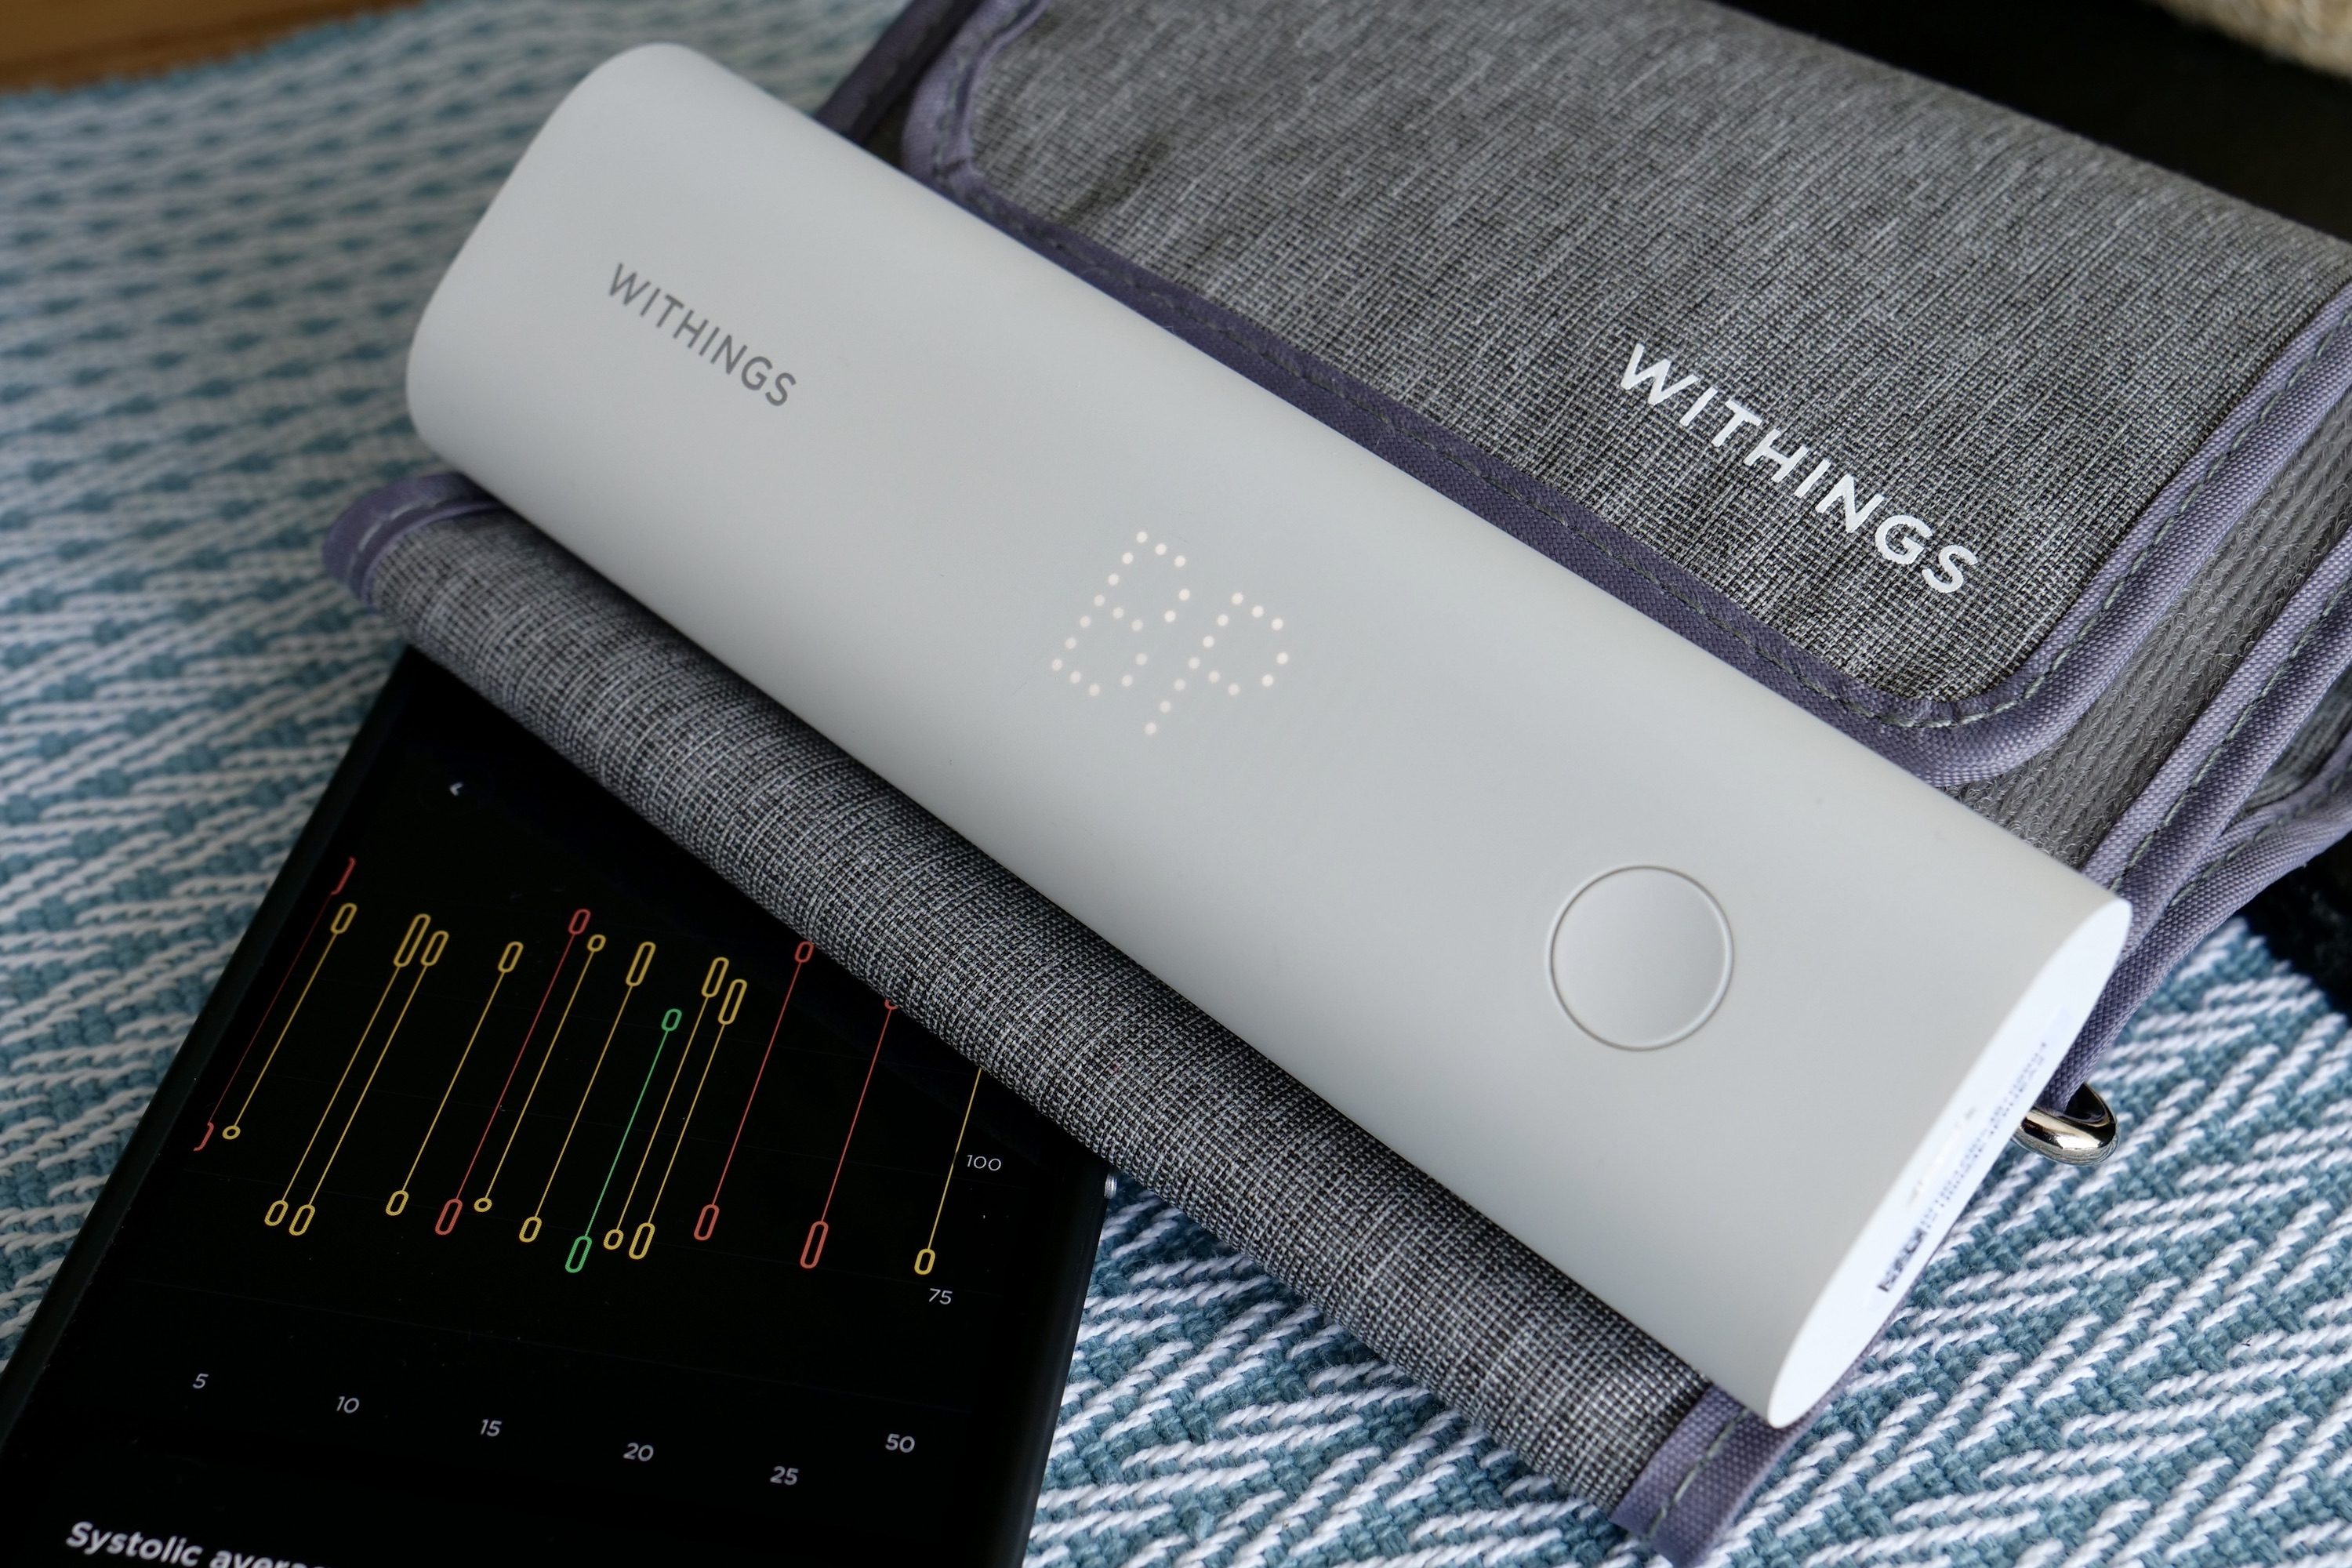 Withings BPM Connect Wi-Fi Smart Blood Pressure Monitor - Apple